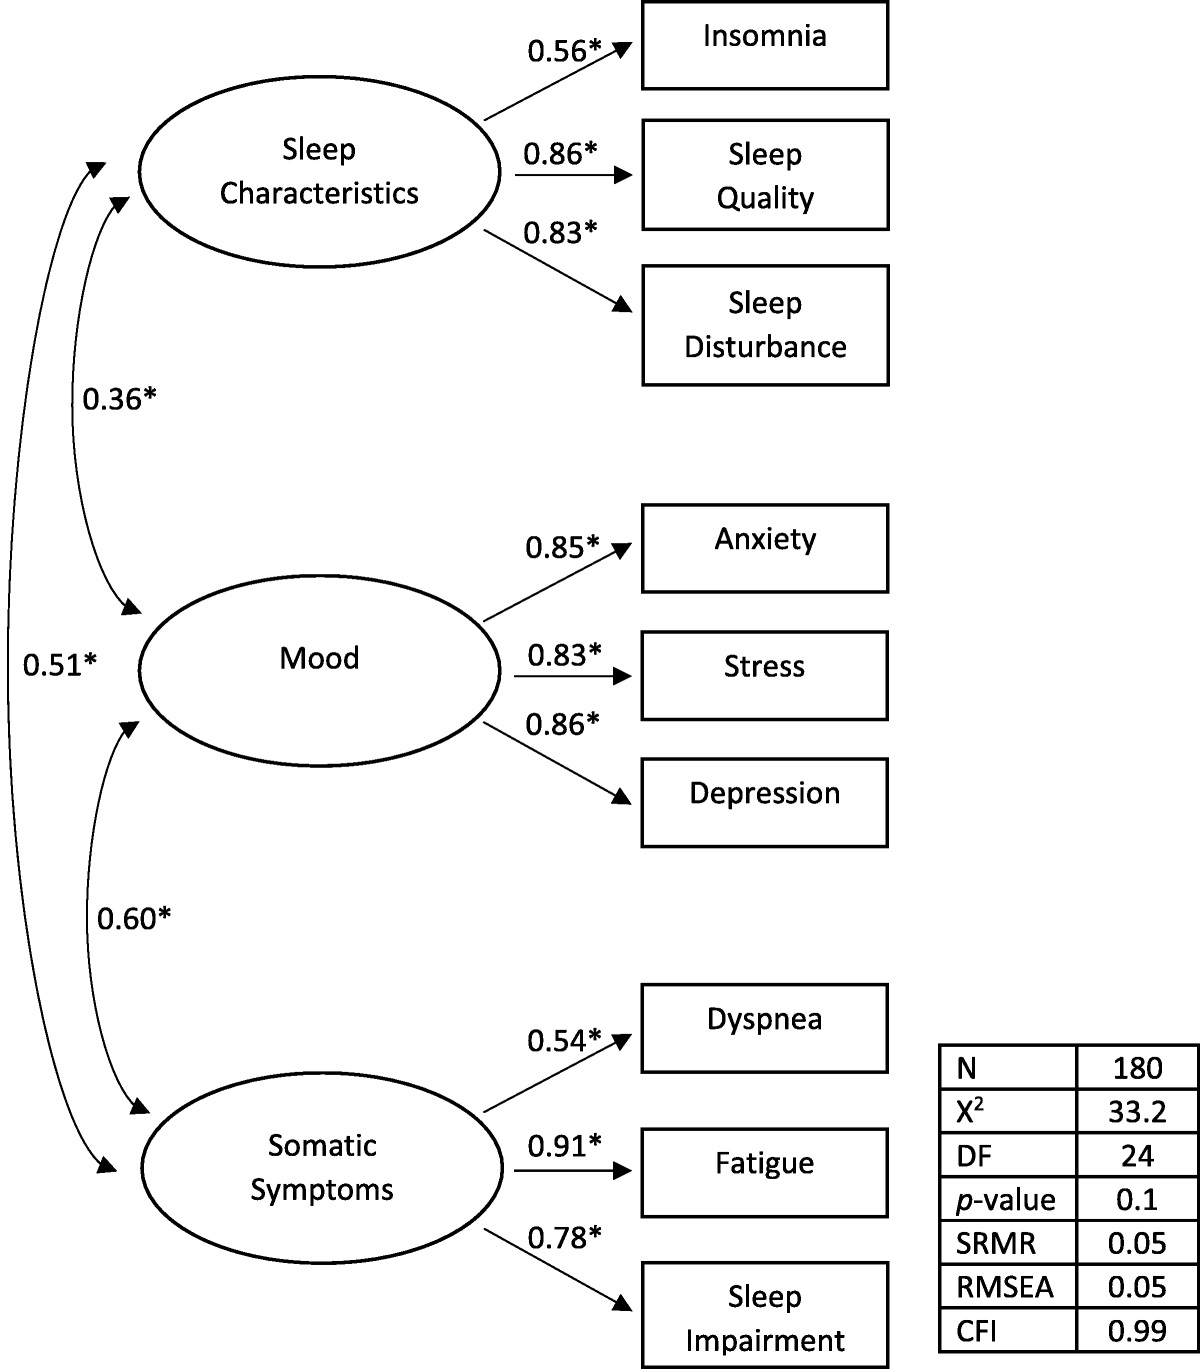 Sleep Characteristics, Mood, Somatic Symptoms, and Self-Care Among People With Heart Failure and Insomnia